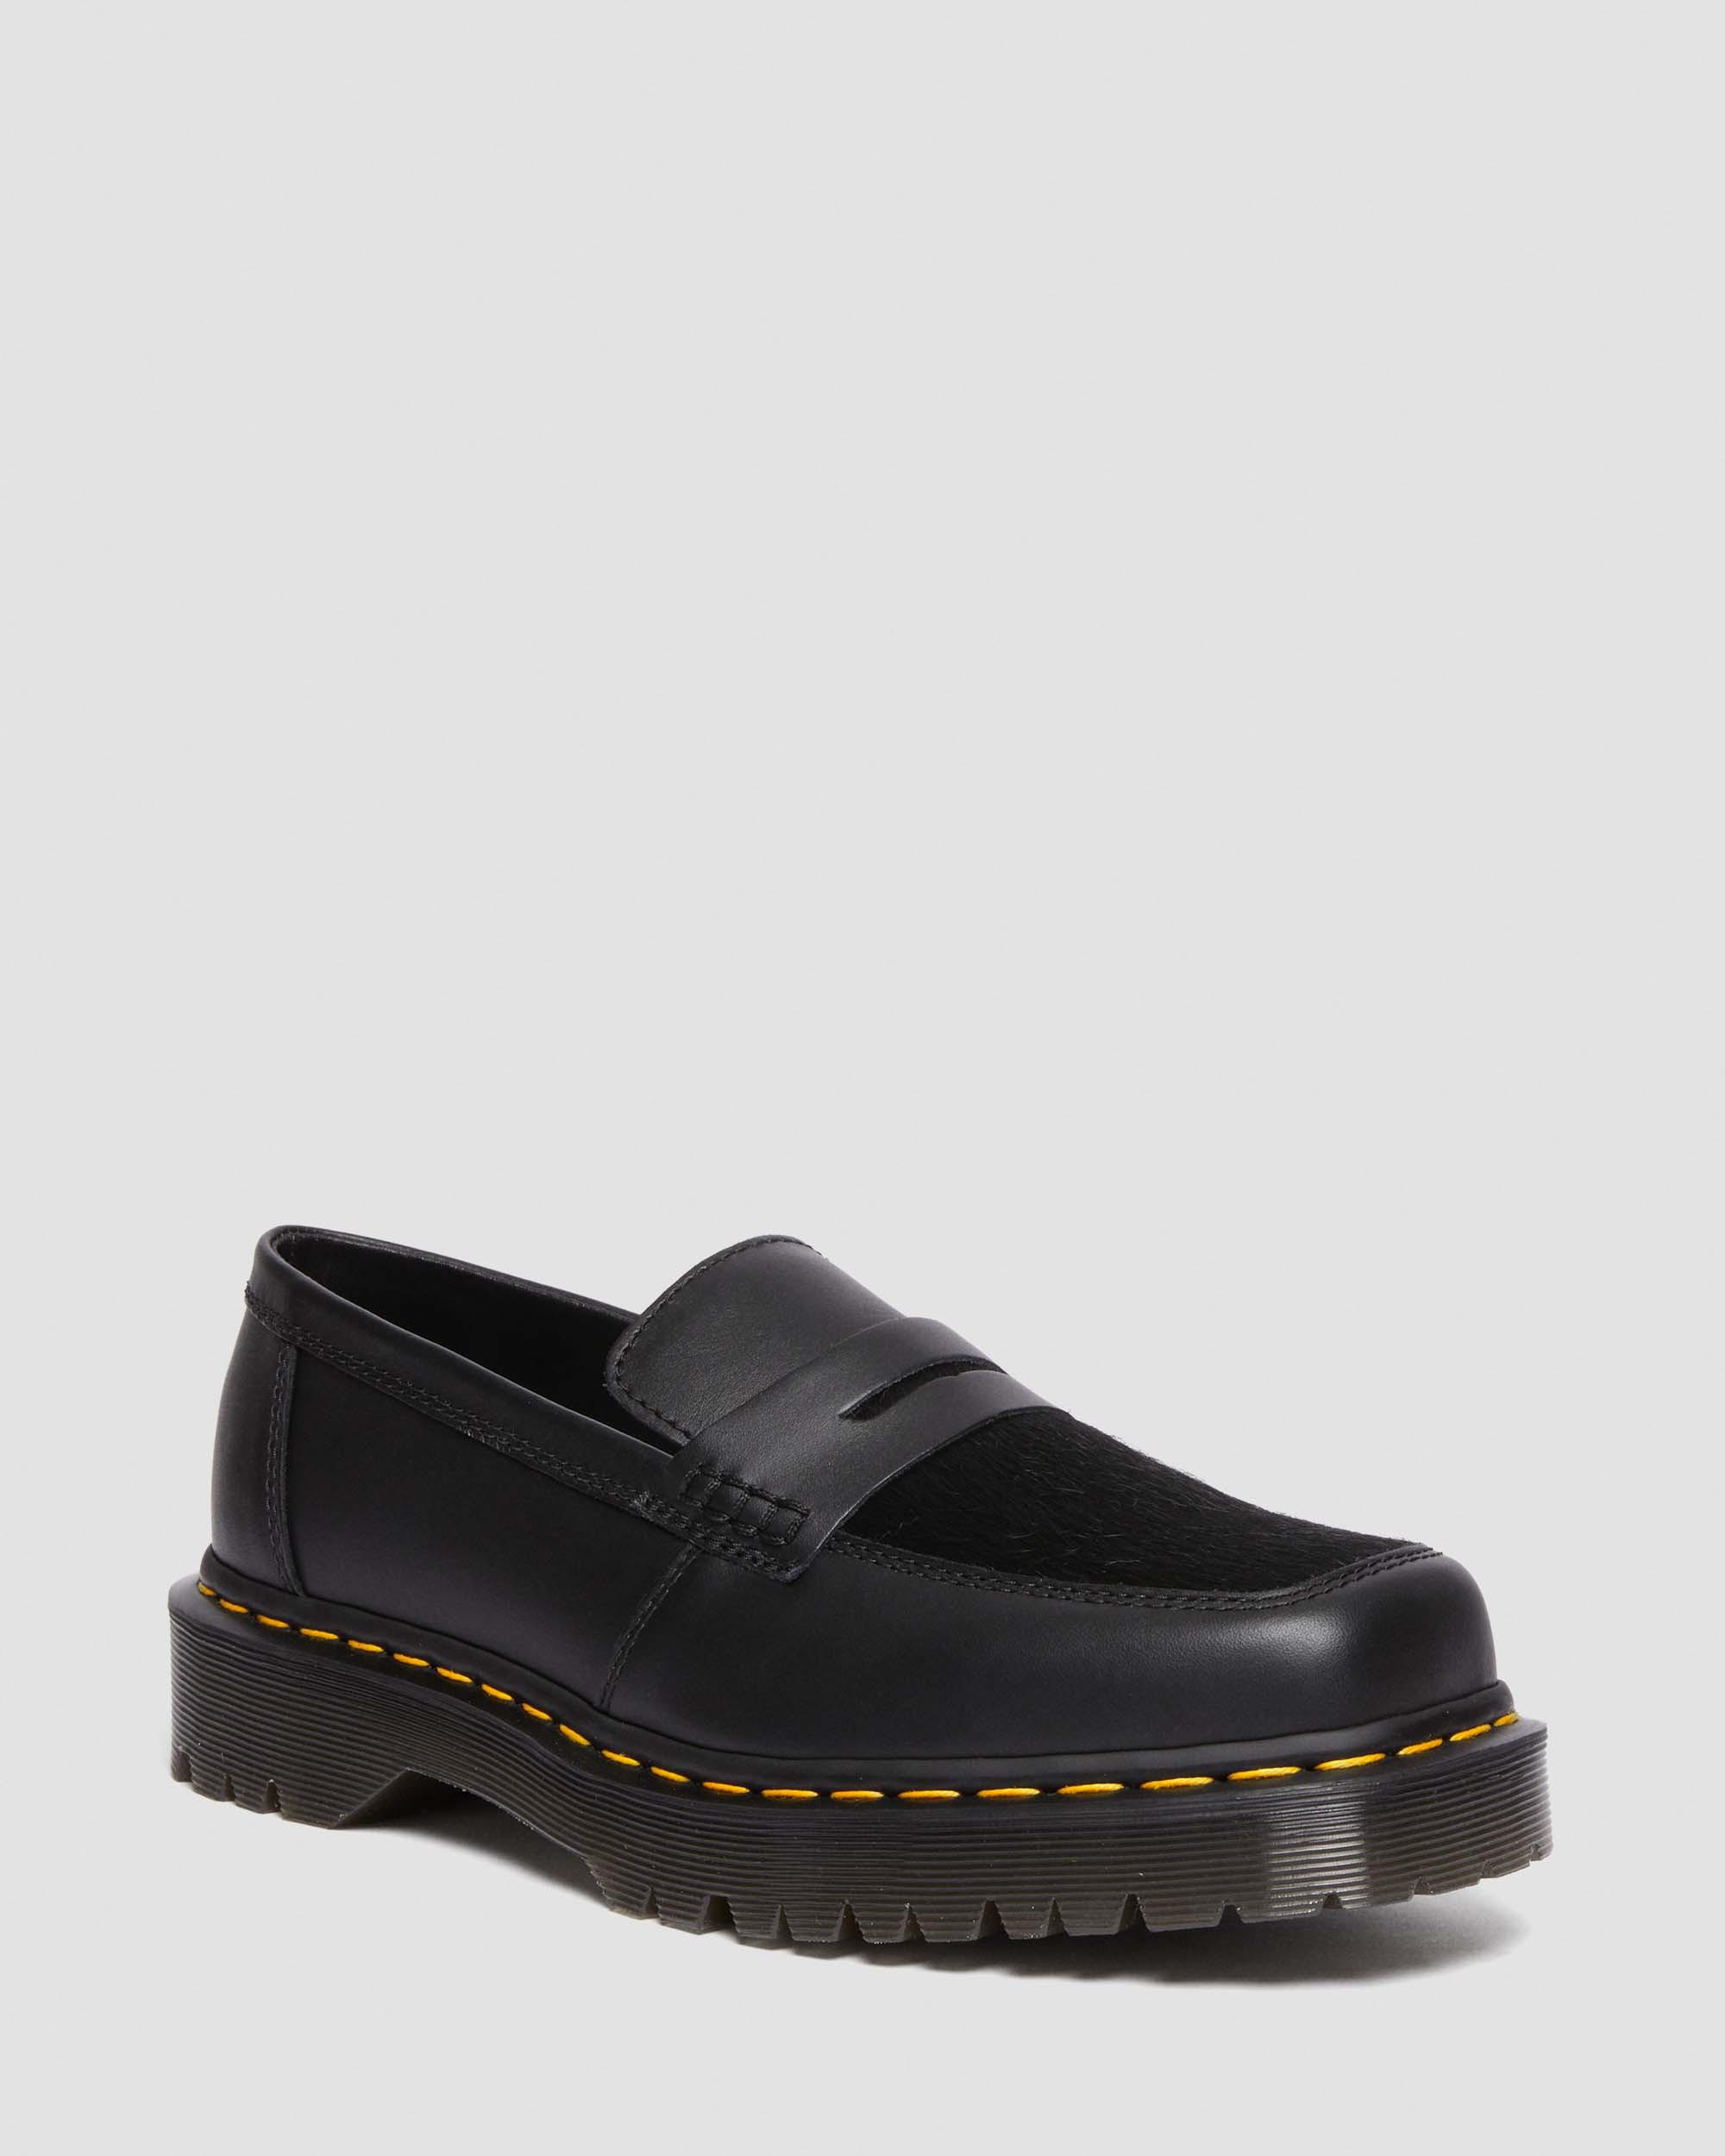 Penton Bex Square Toe Hair-On & Leather Loafers